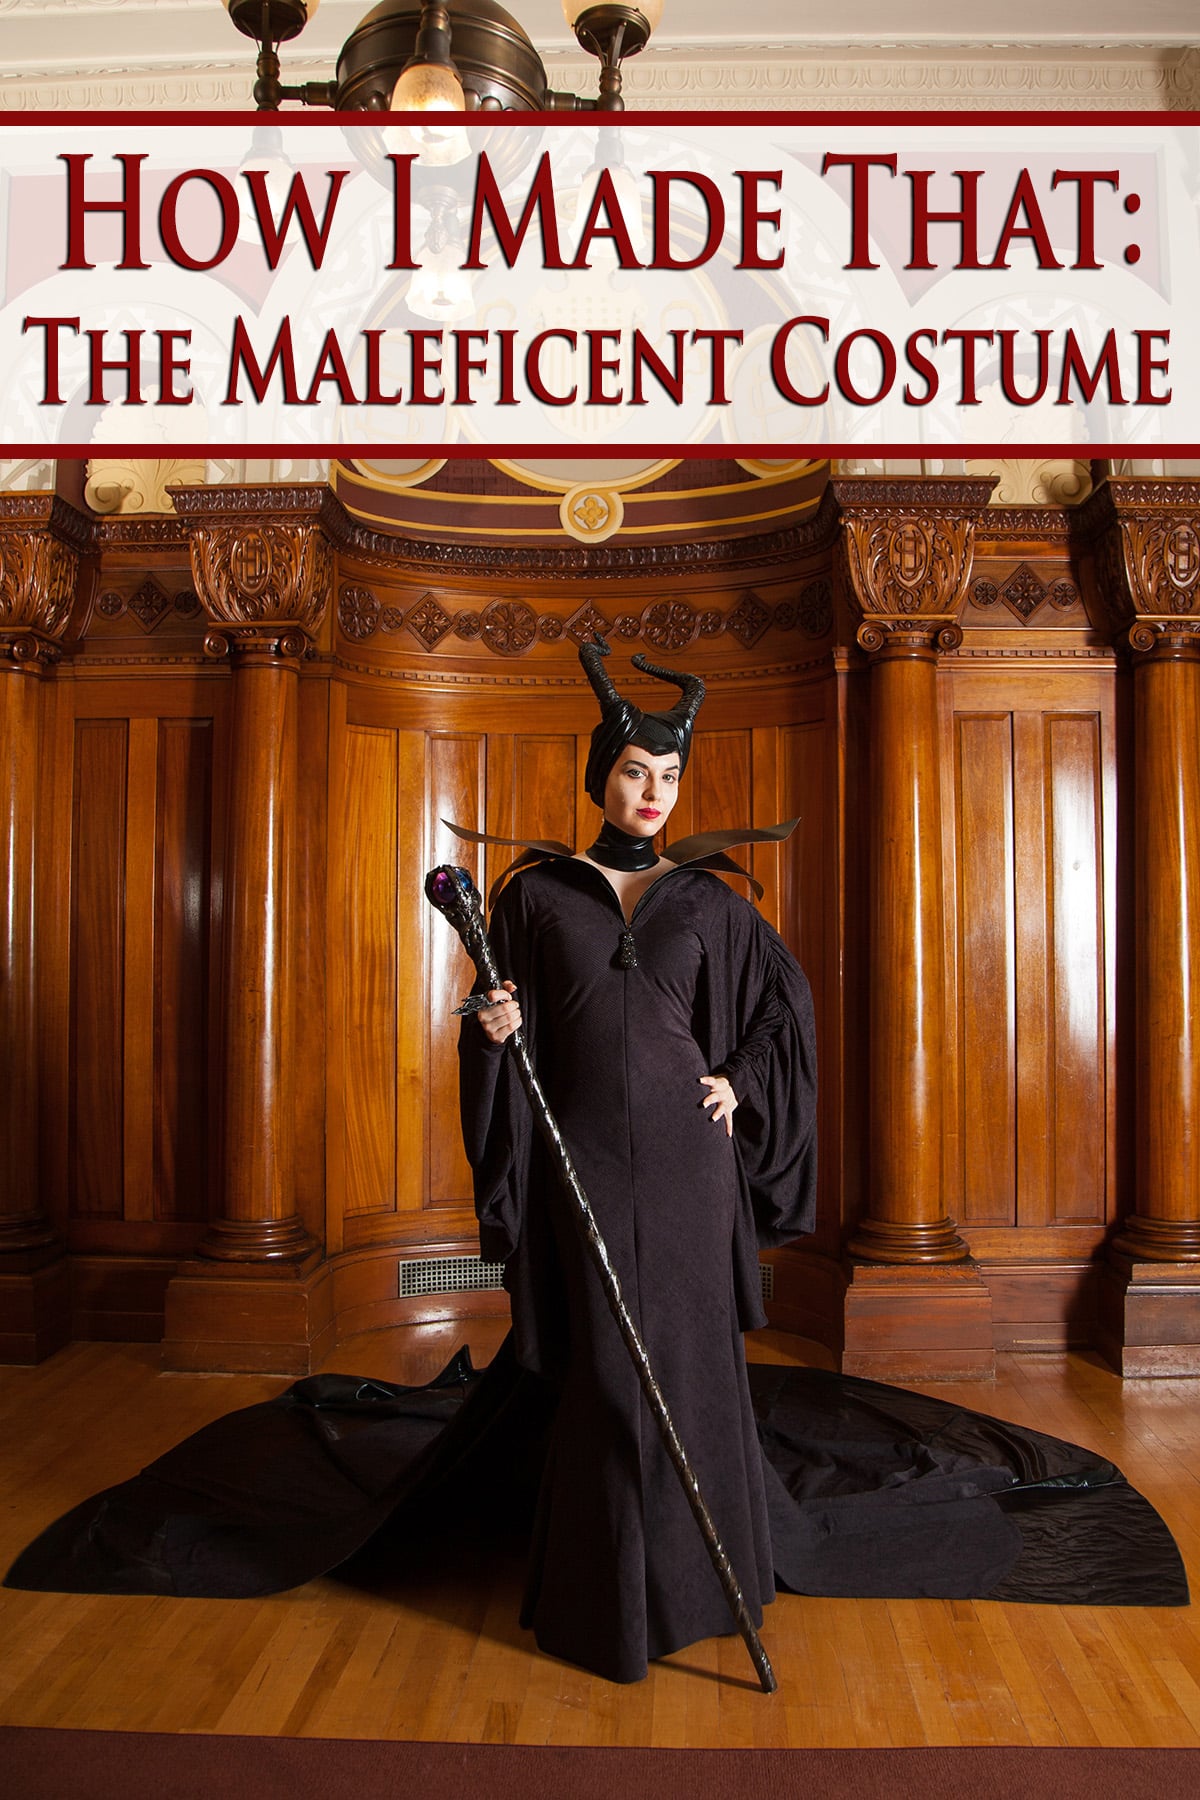 Hollywood Movie Costumes and Props: Angelina Jolie's Maleficent Christening  curse movie costume on display...